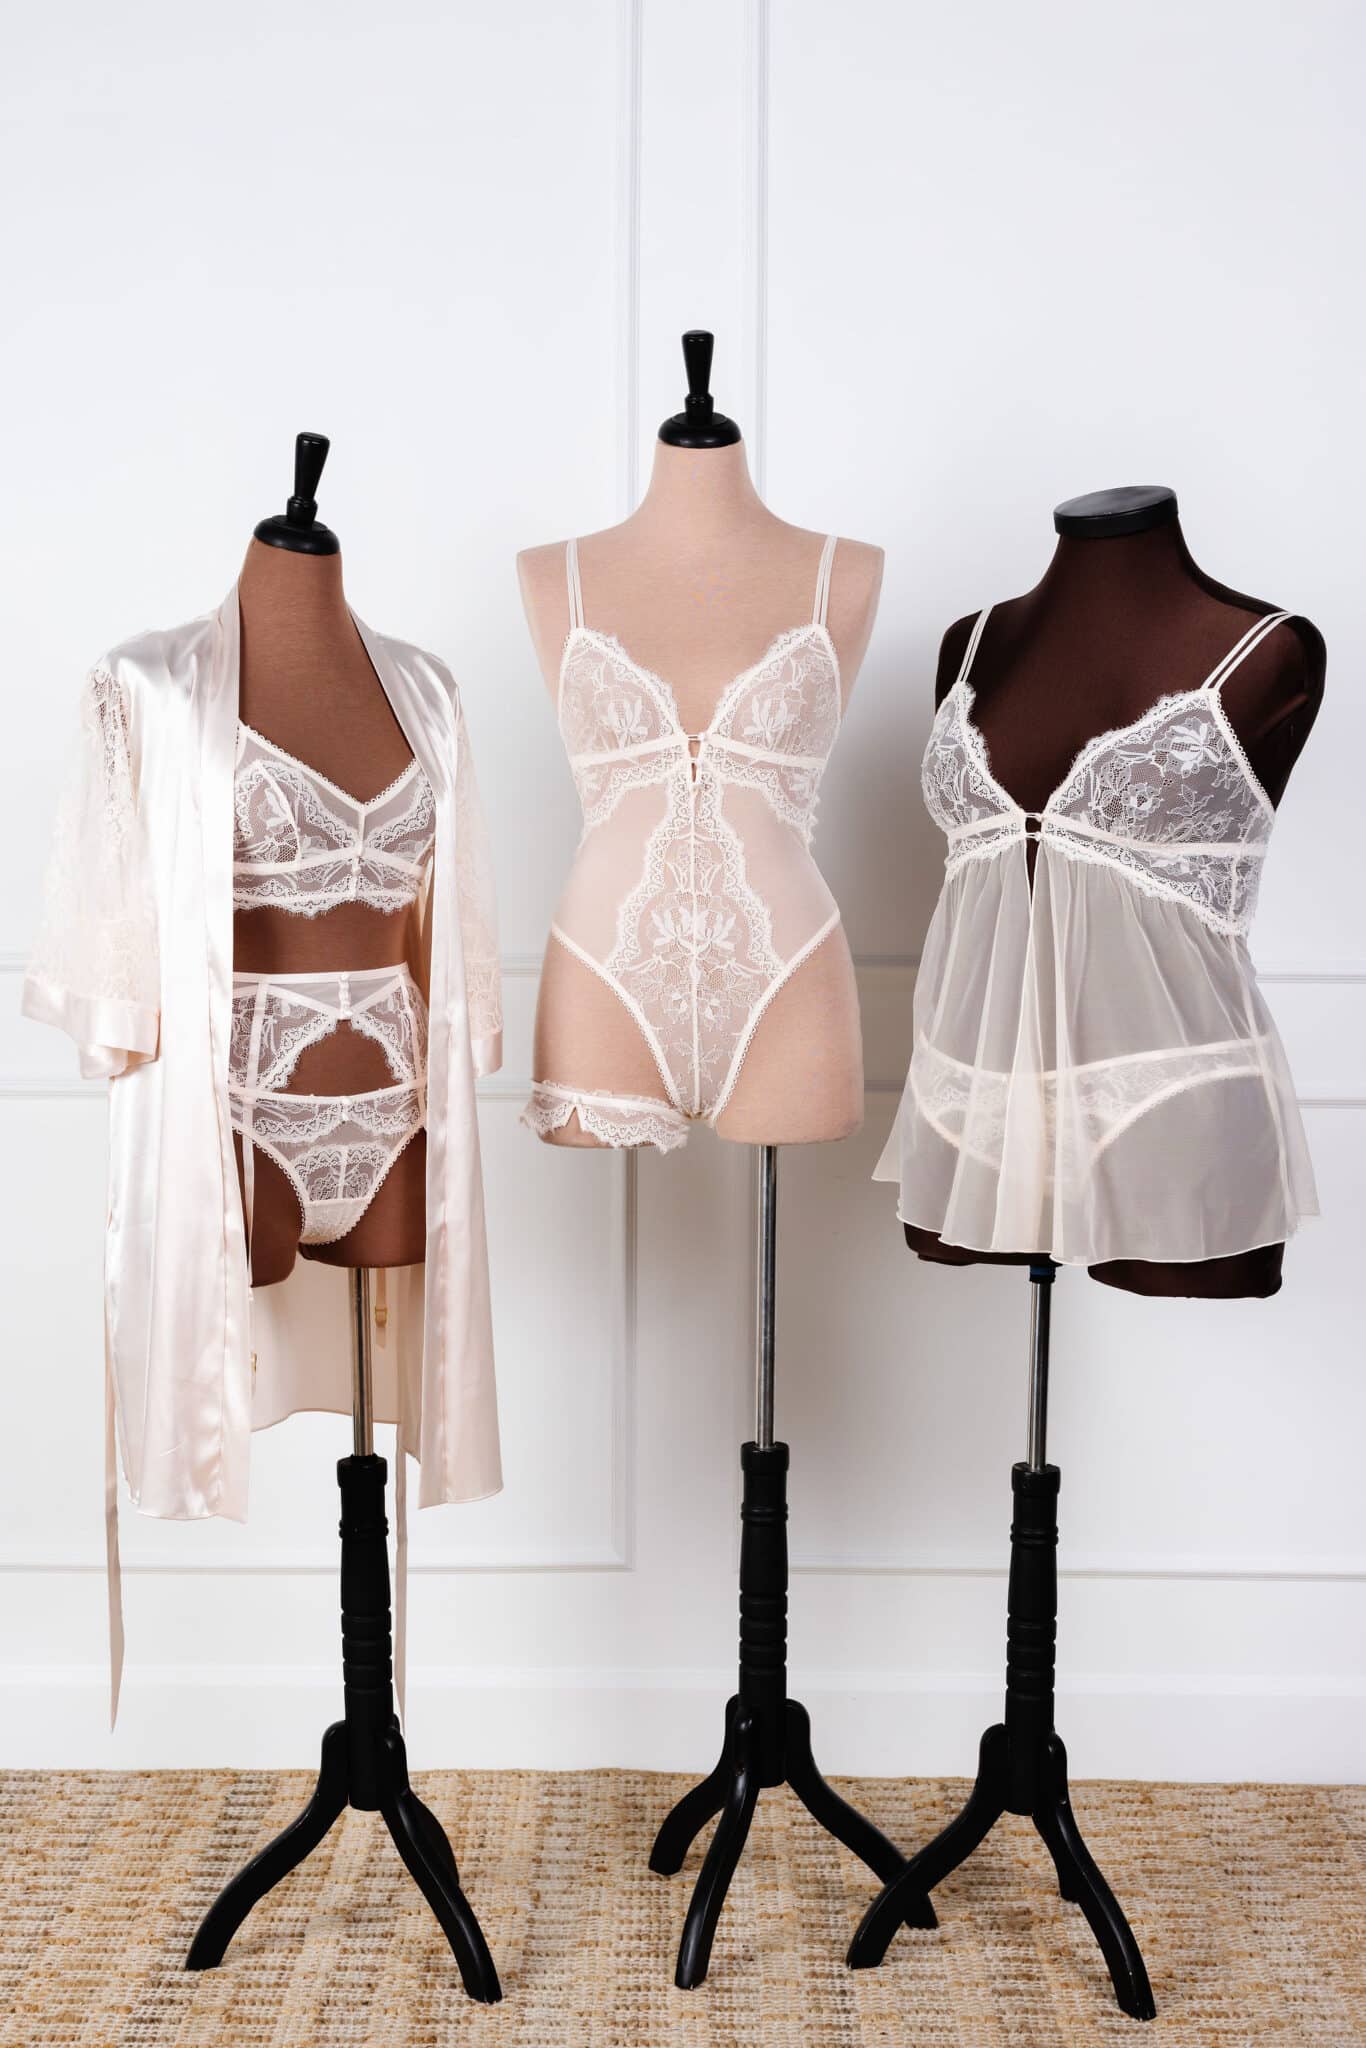 Modeless Lingerie Shopping example with three lingerie pieces on modeless dressforms. 